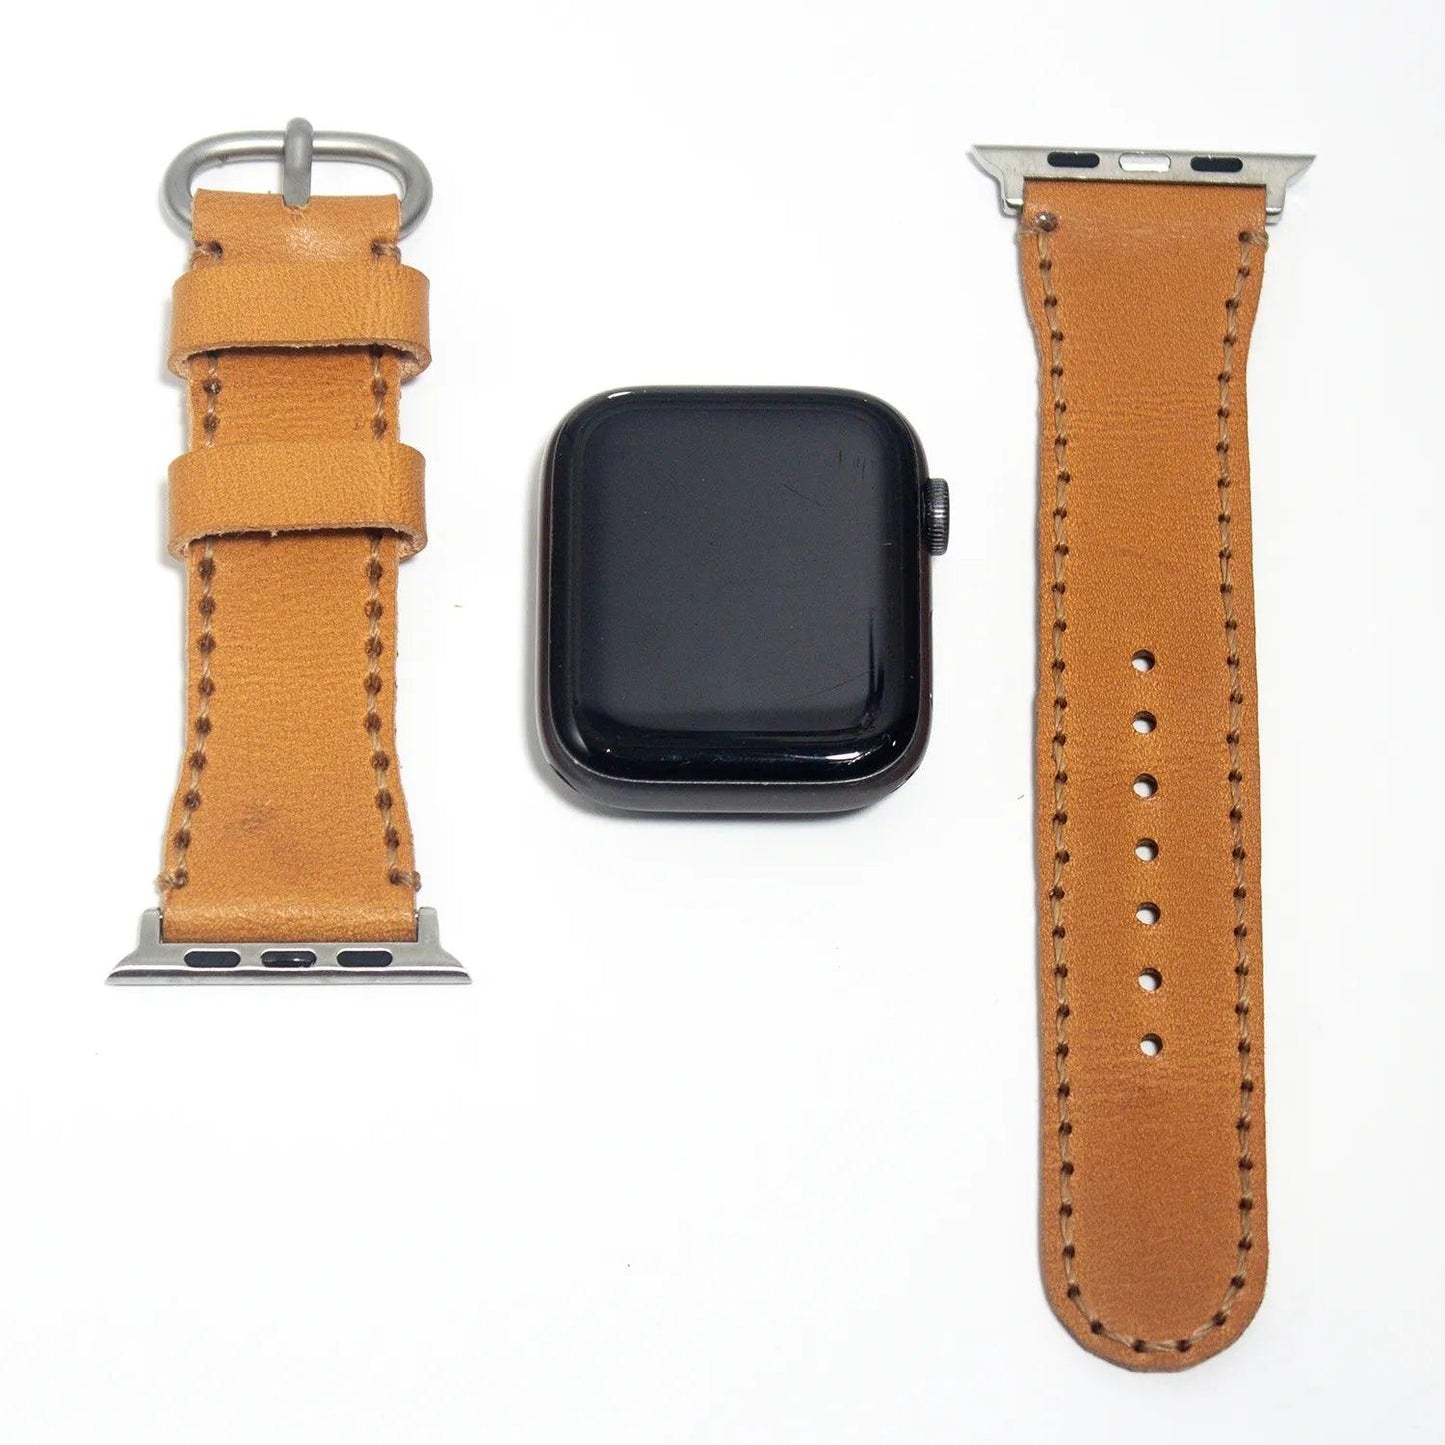 Durable leather watch straps in light orange Buttero leather, offering both style and long-lasting quality for daily wear.